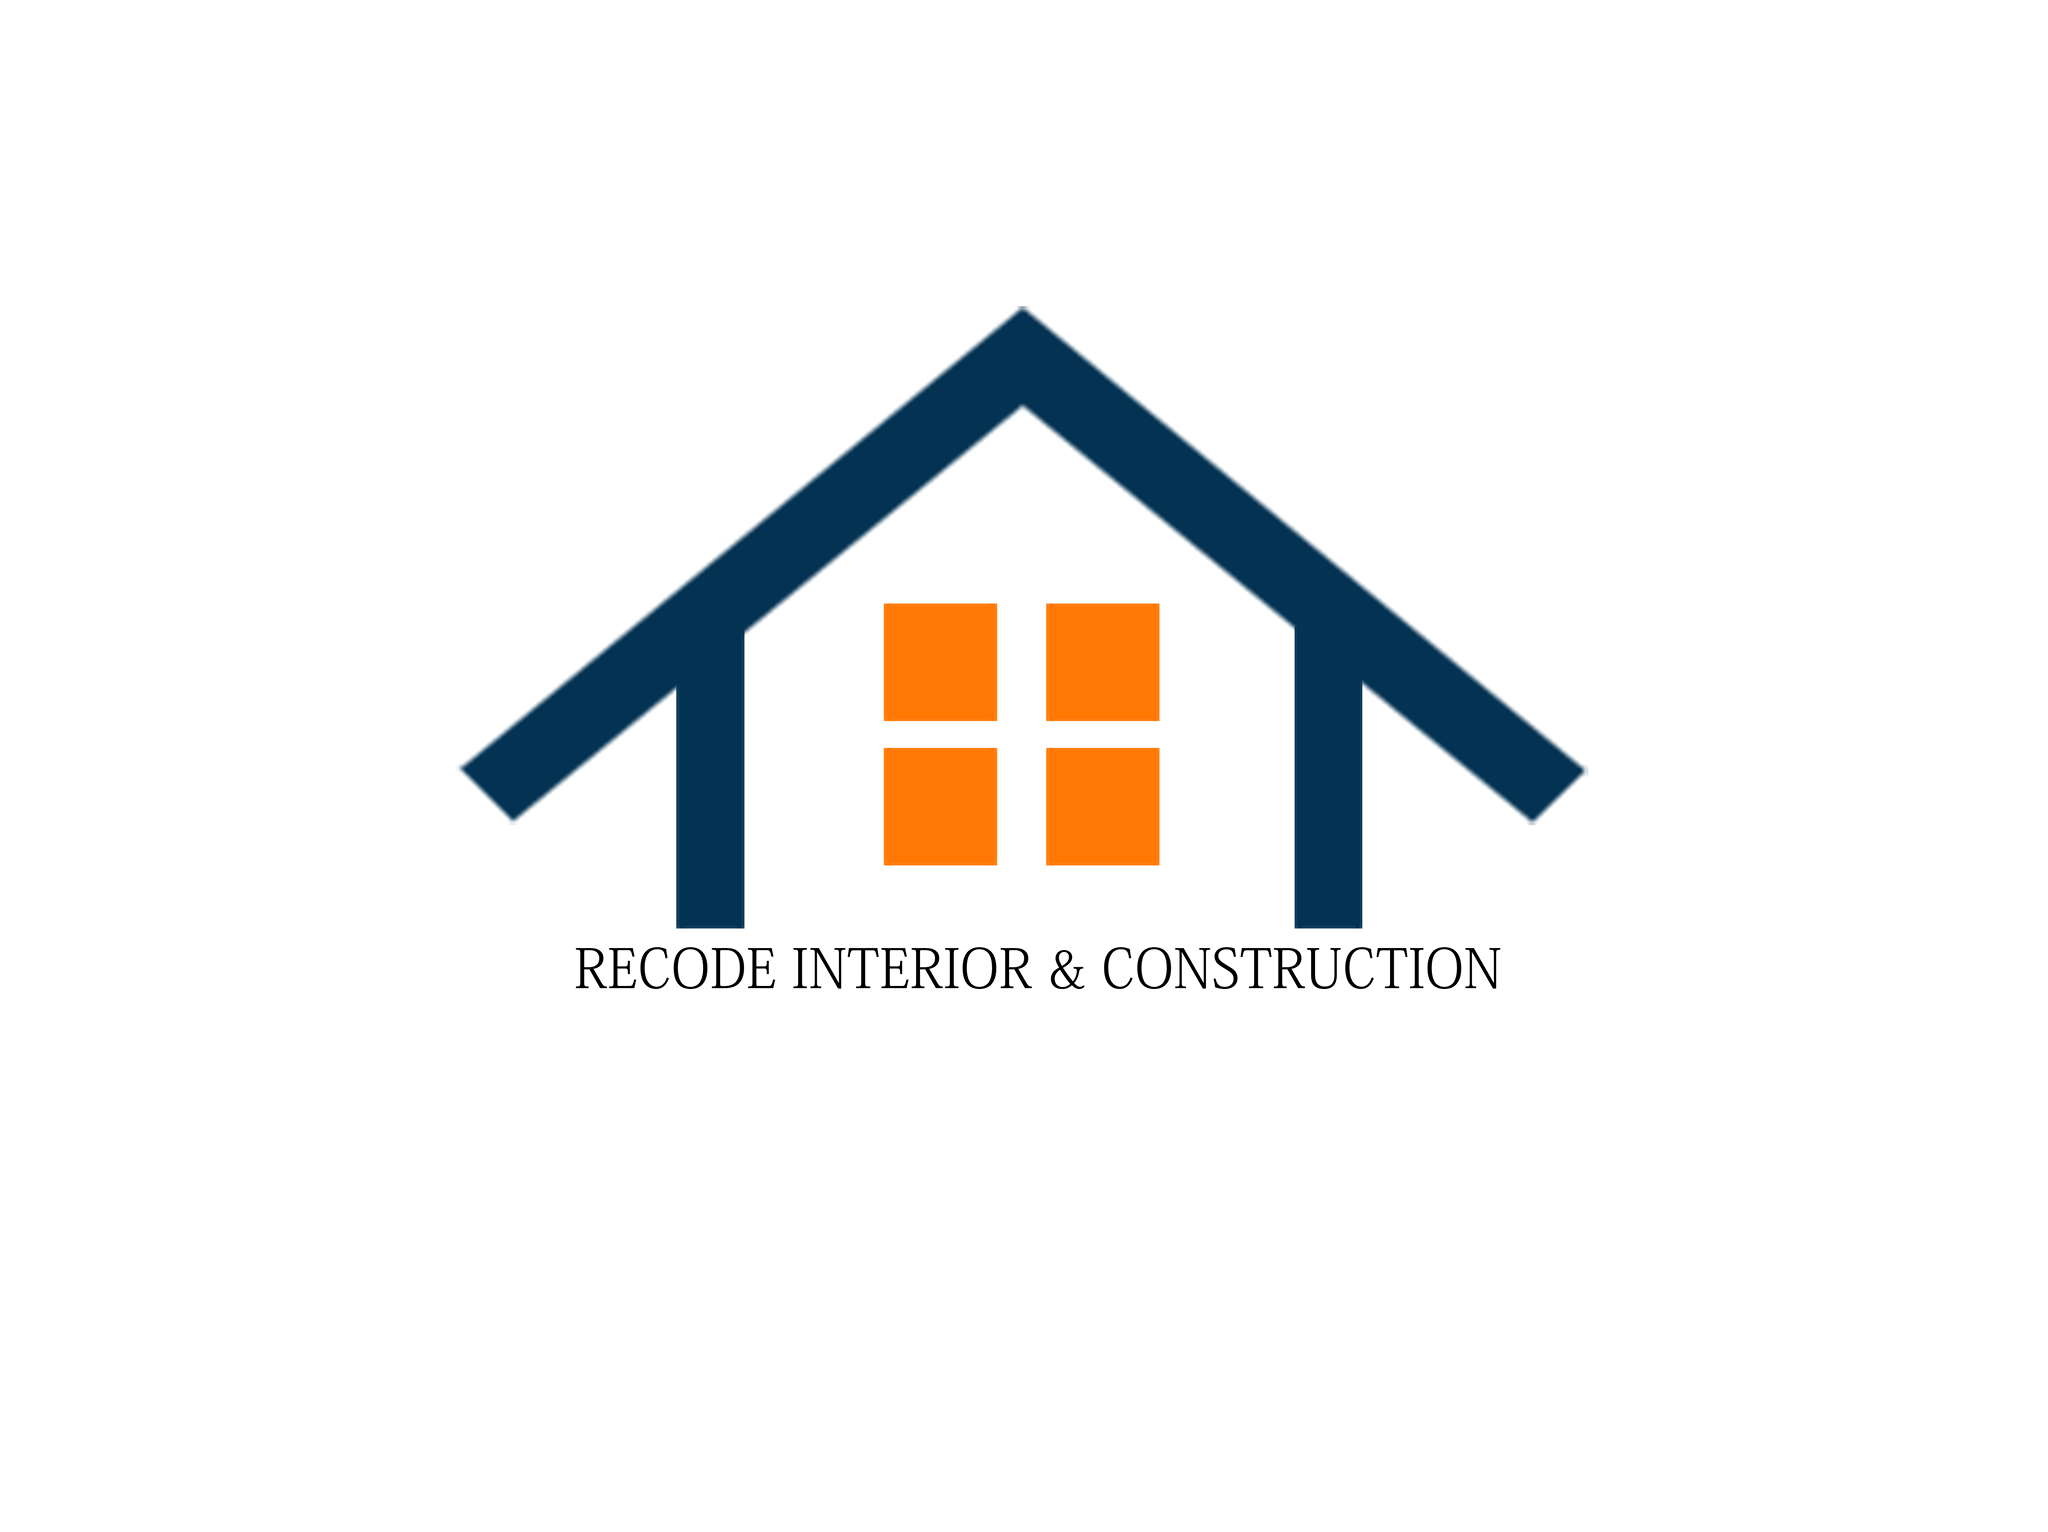 RECODE INTERIOR & CONSTRUCTION|IT Services|Professional Services